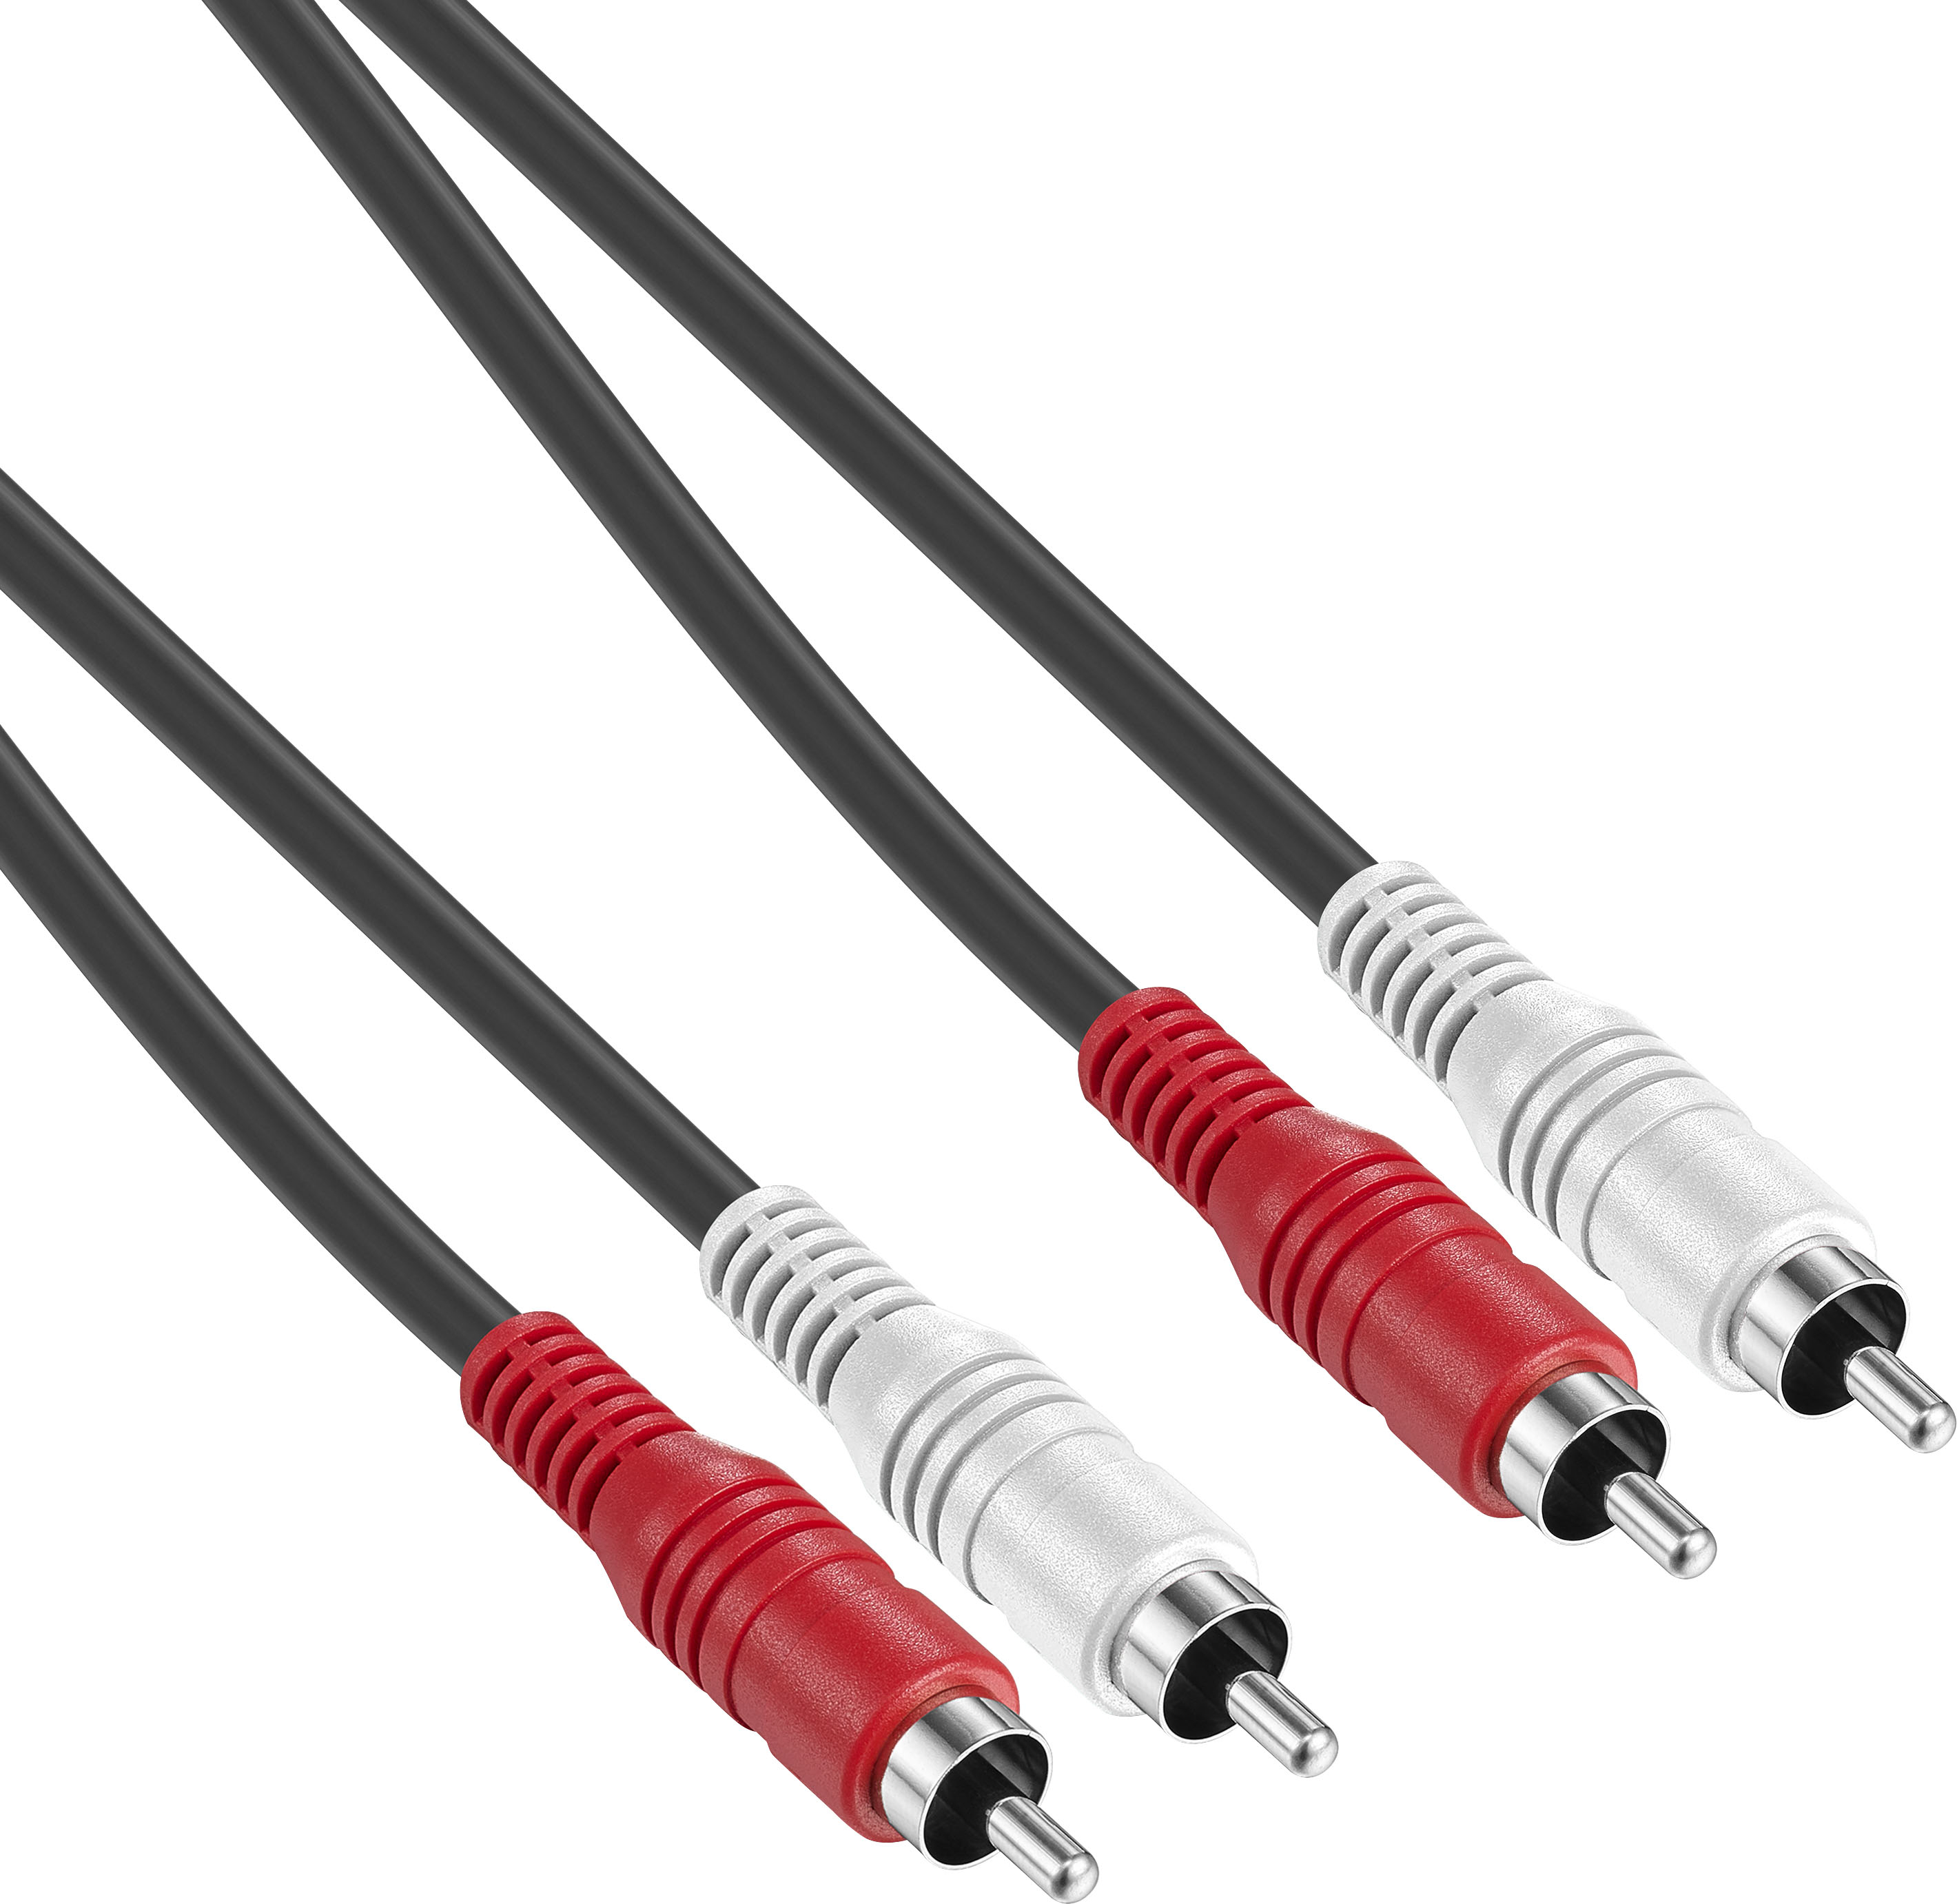 RCA RCA AudioVideo Cable 6 ft RCA AV Cable for AudioVideo Device Camcorder  TV First End RCA AudioVideo - Office Depot